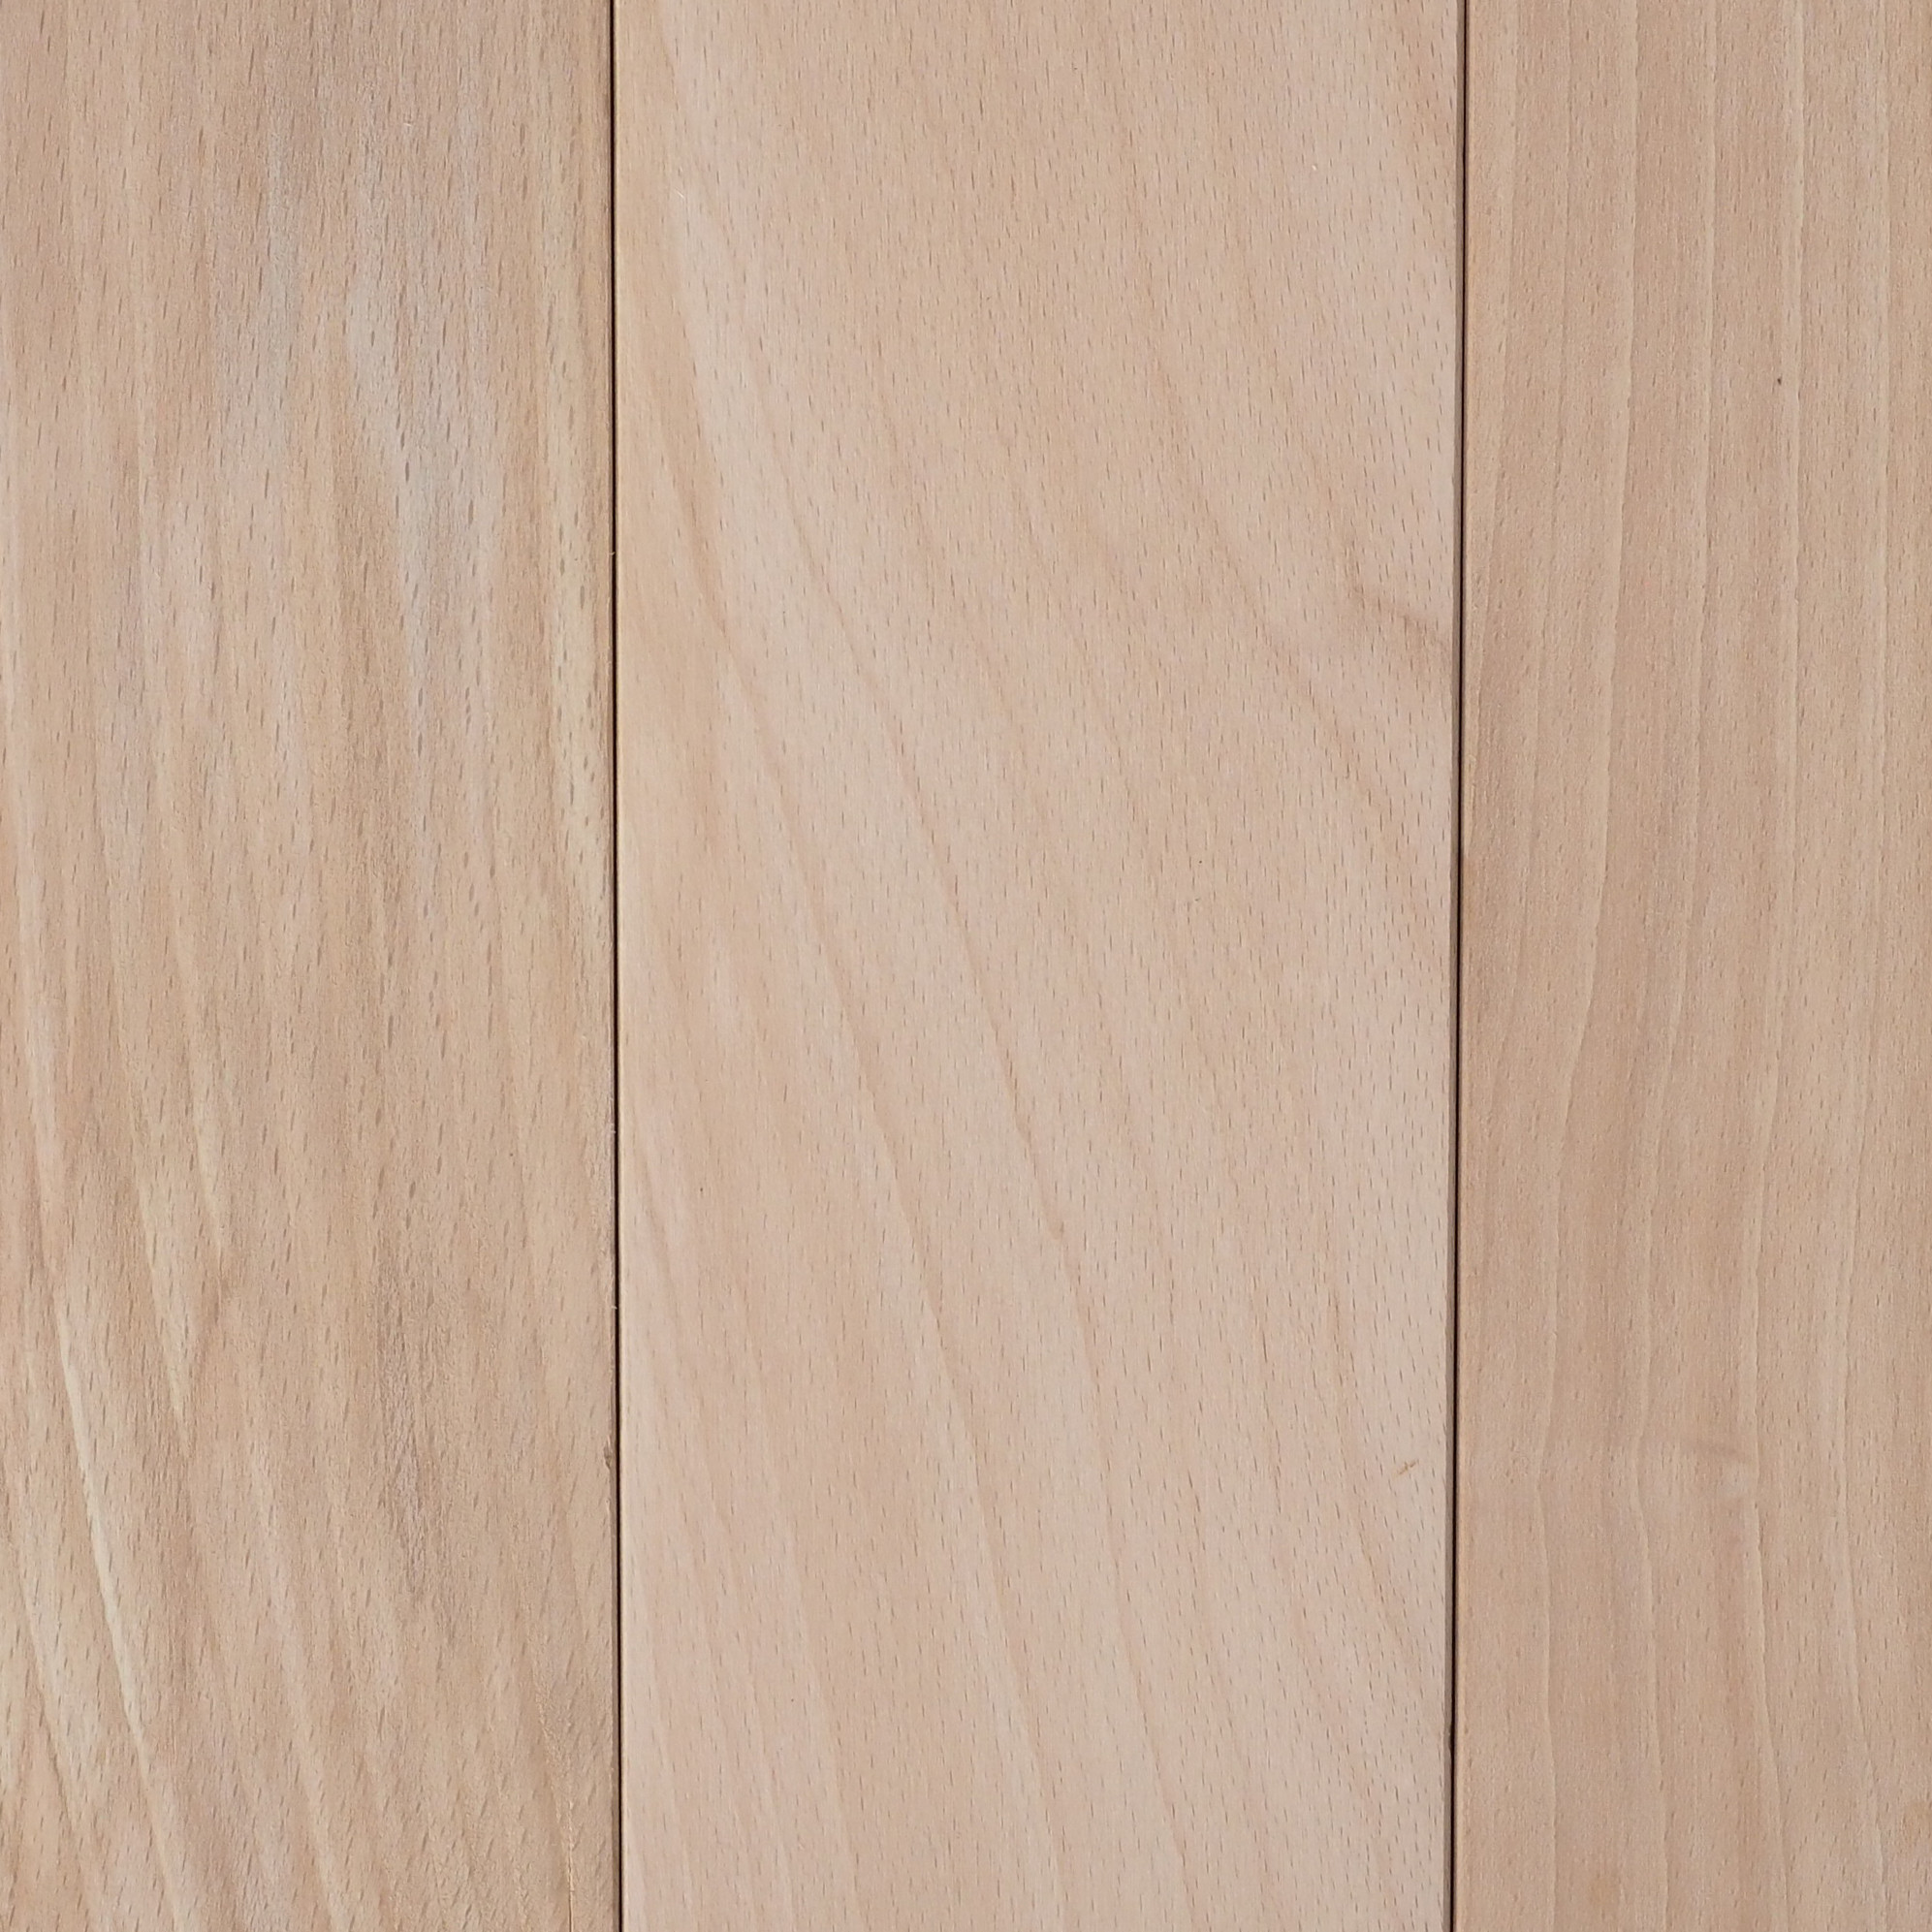 Parquet in beech wood from Sonian Forest